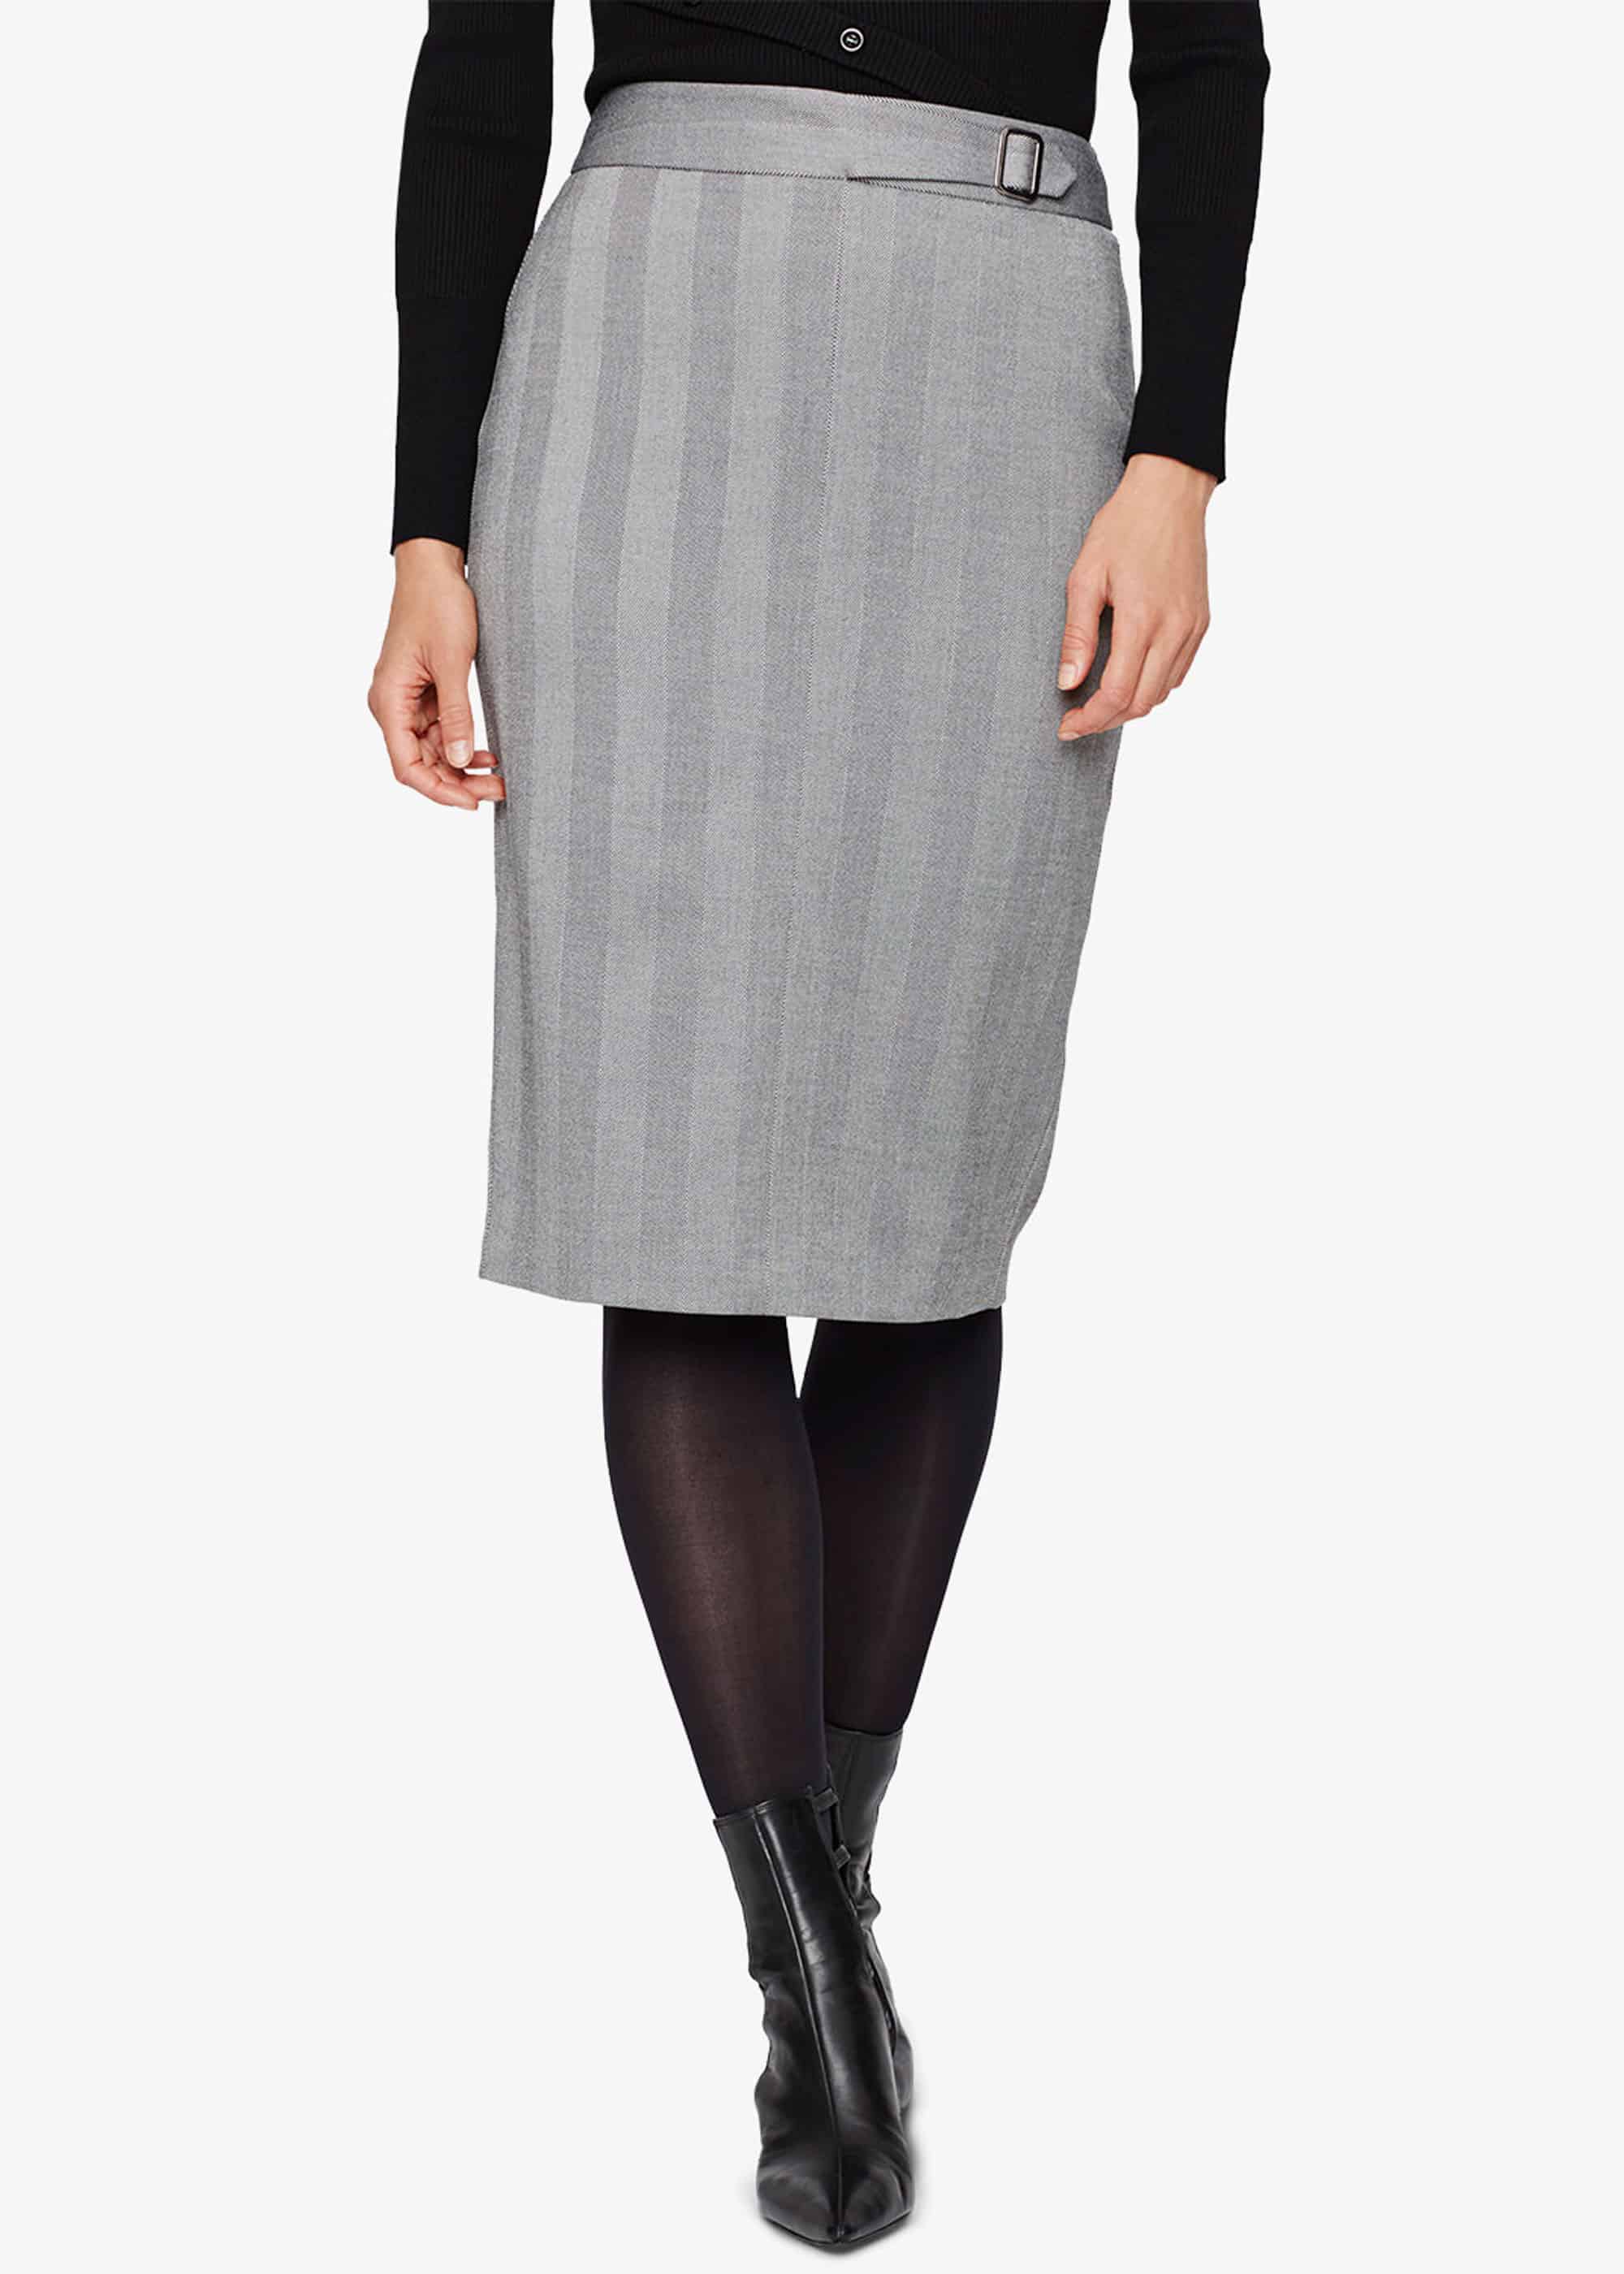 Pencil Skirts and Skirt Suits for Mother of the Bride or Groom